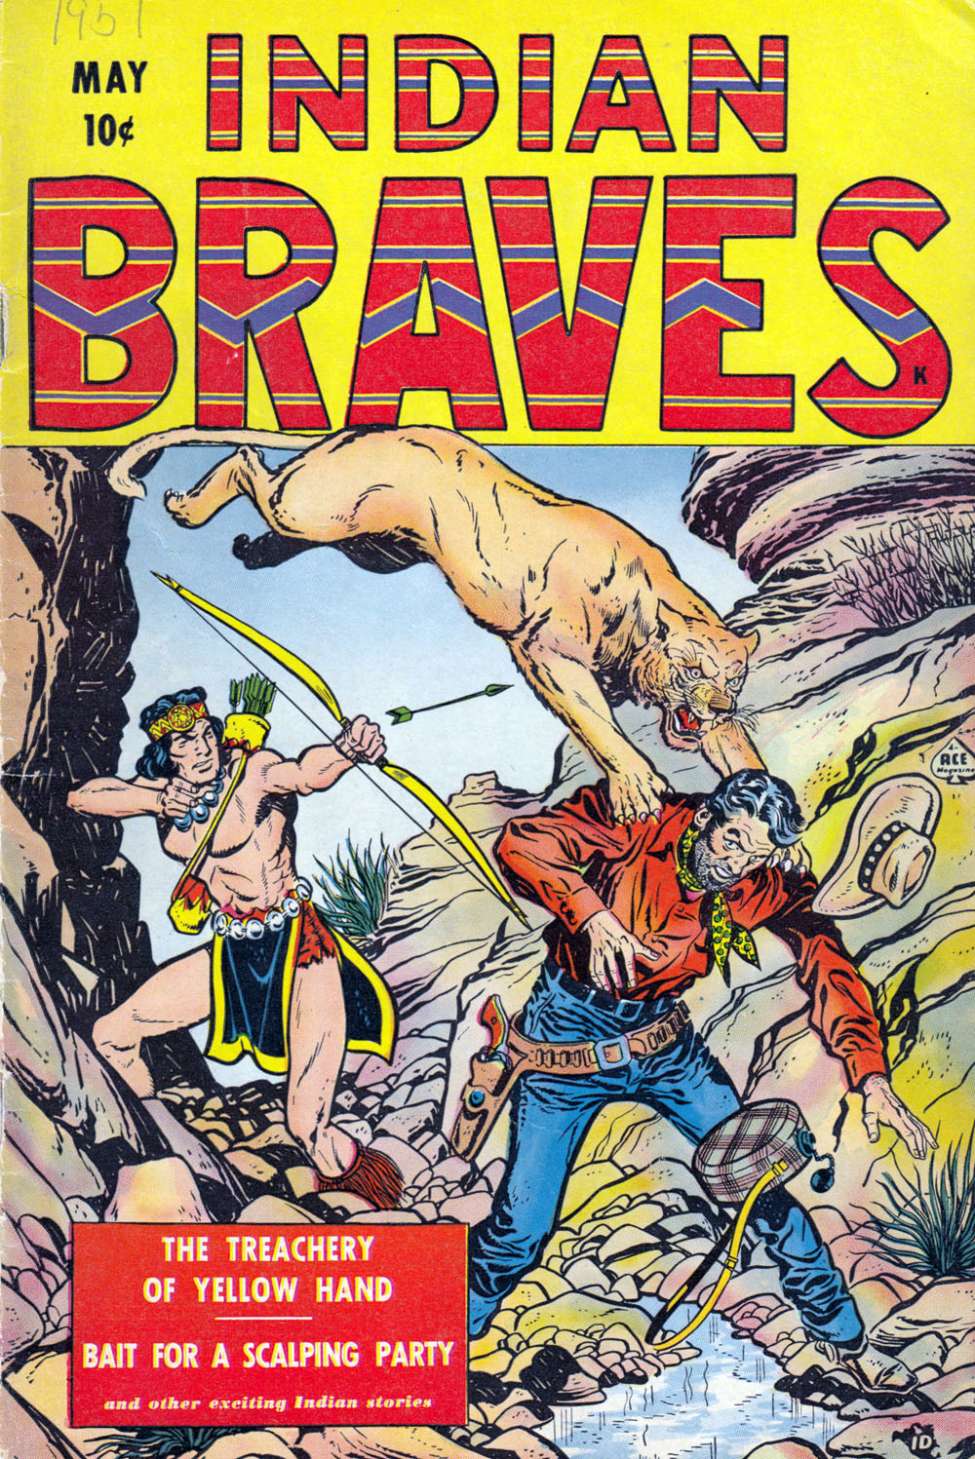 Book Cover For Indian Braves 2